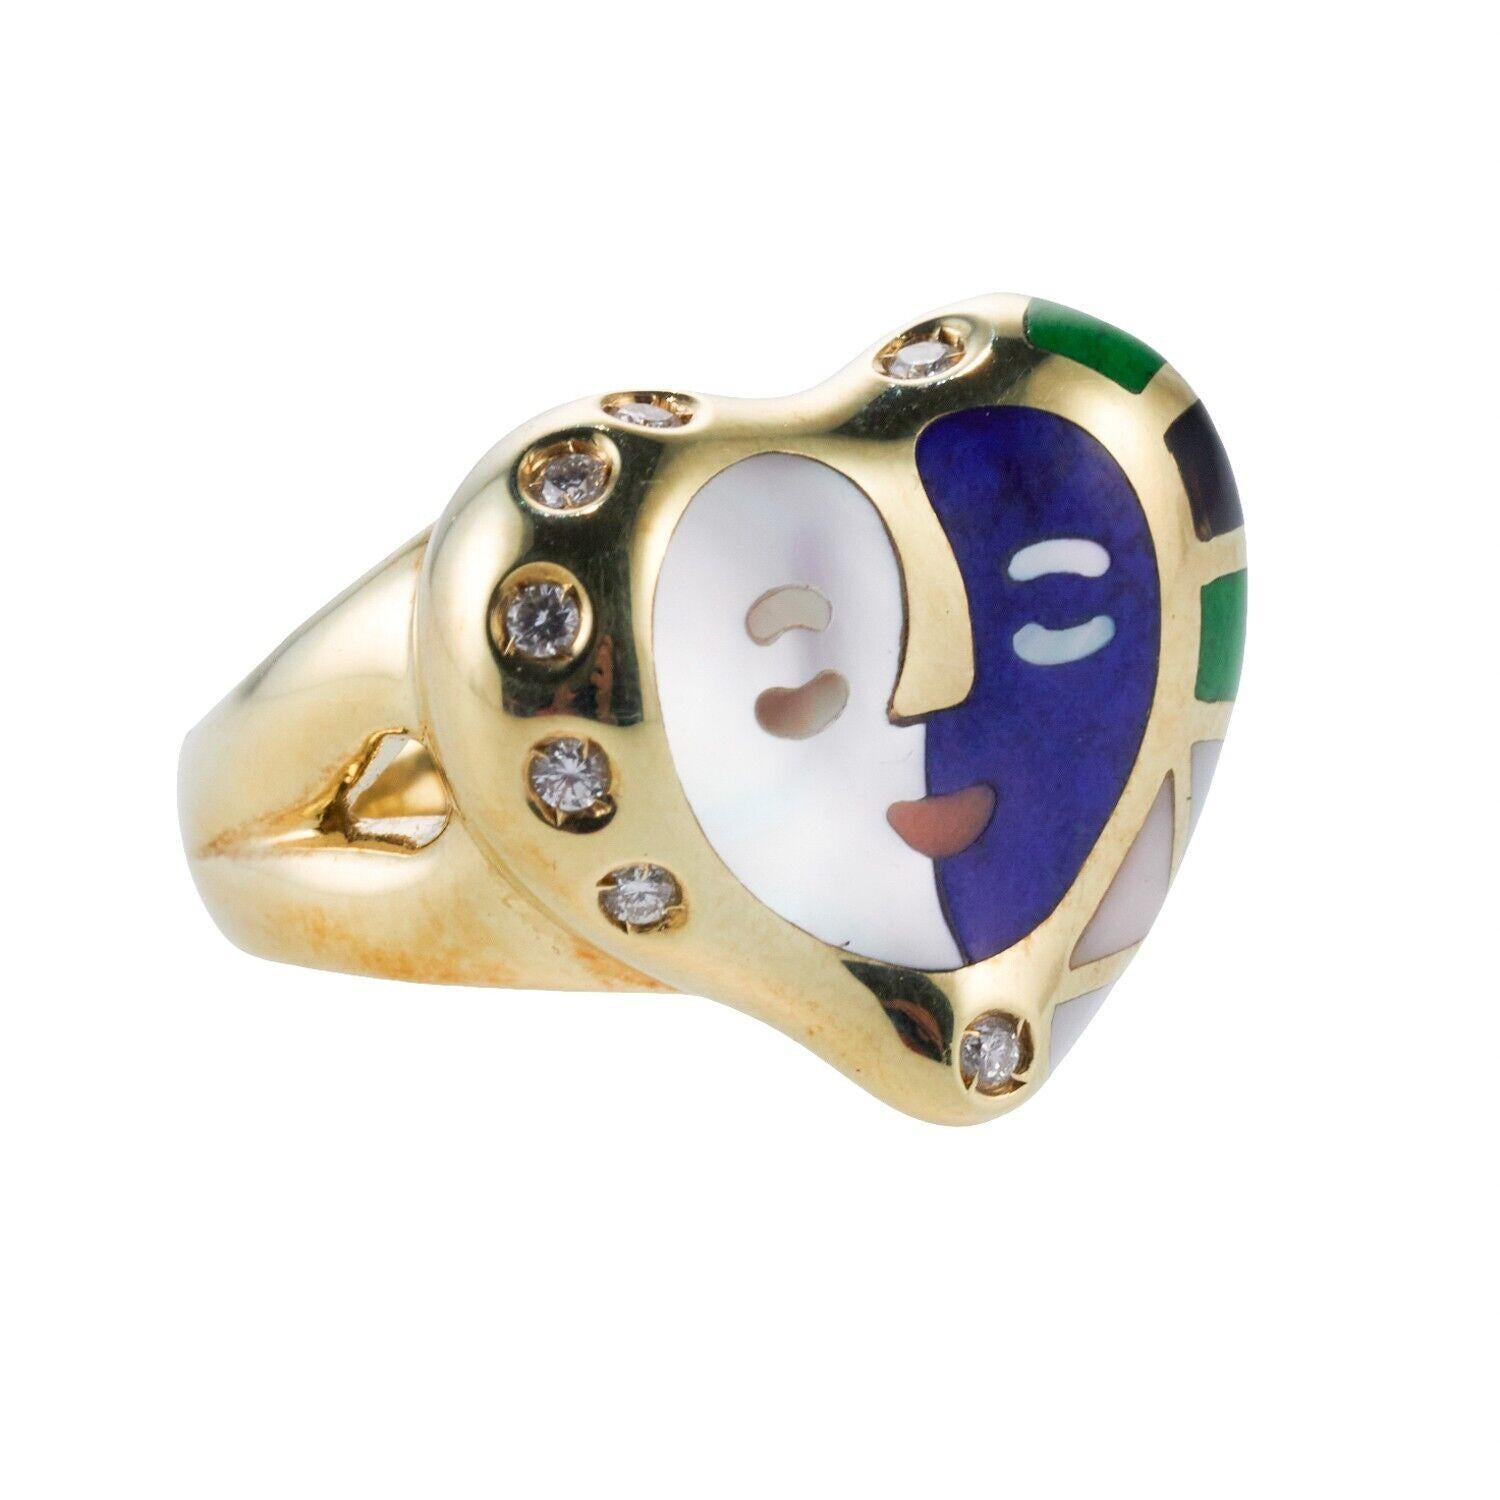 A 14k yellow gold ring set with approximately 0.18ctw of diamonds, mother-of-pearl, onyx, lapis and malachite. Ring Size 6.5, Top is 18mm x 22mm. Weight is 8.2 grams.